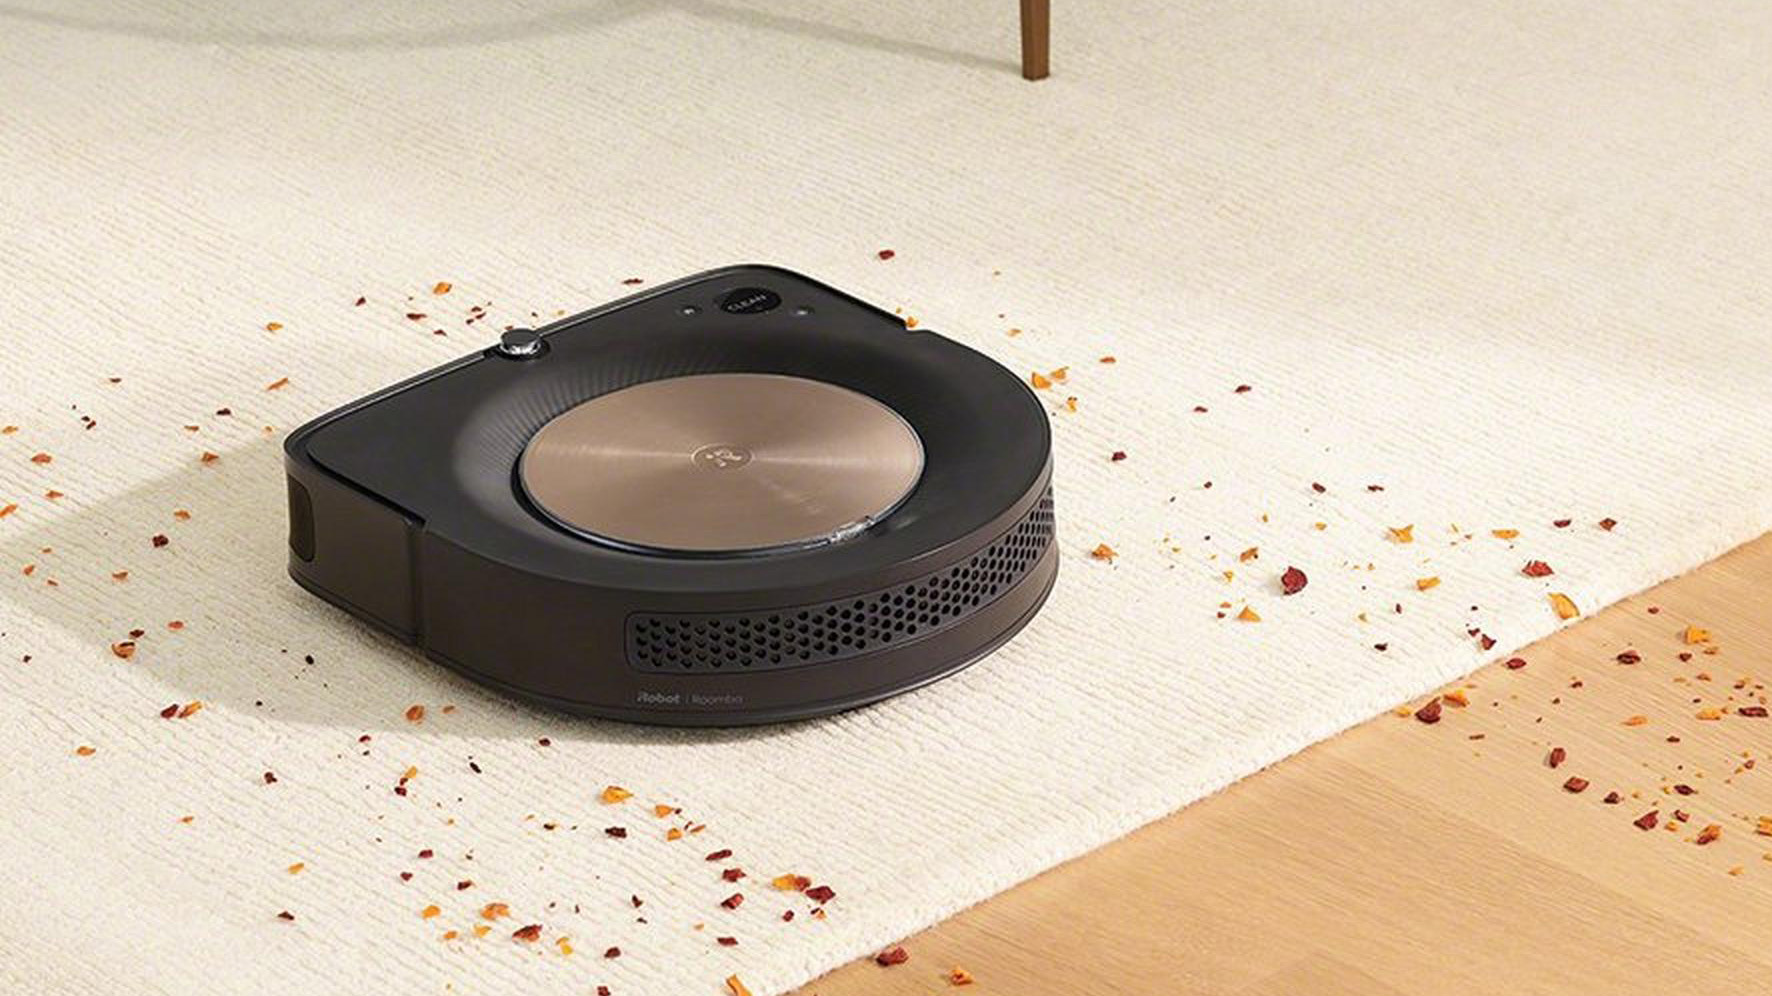 iRobot's Roomba s9+ is on sale for $200 off for Mother's Day